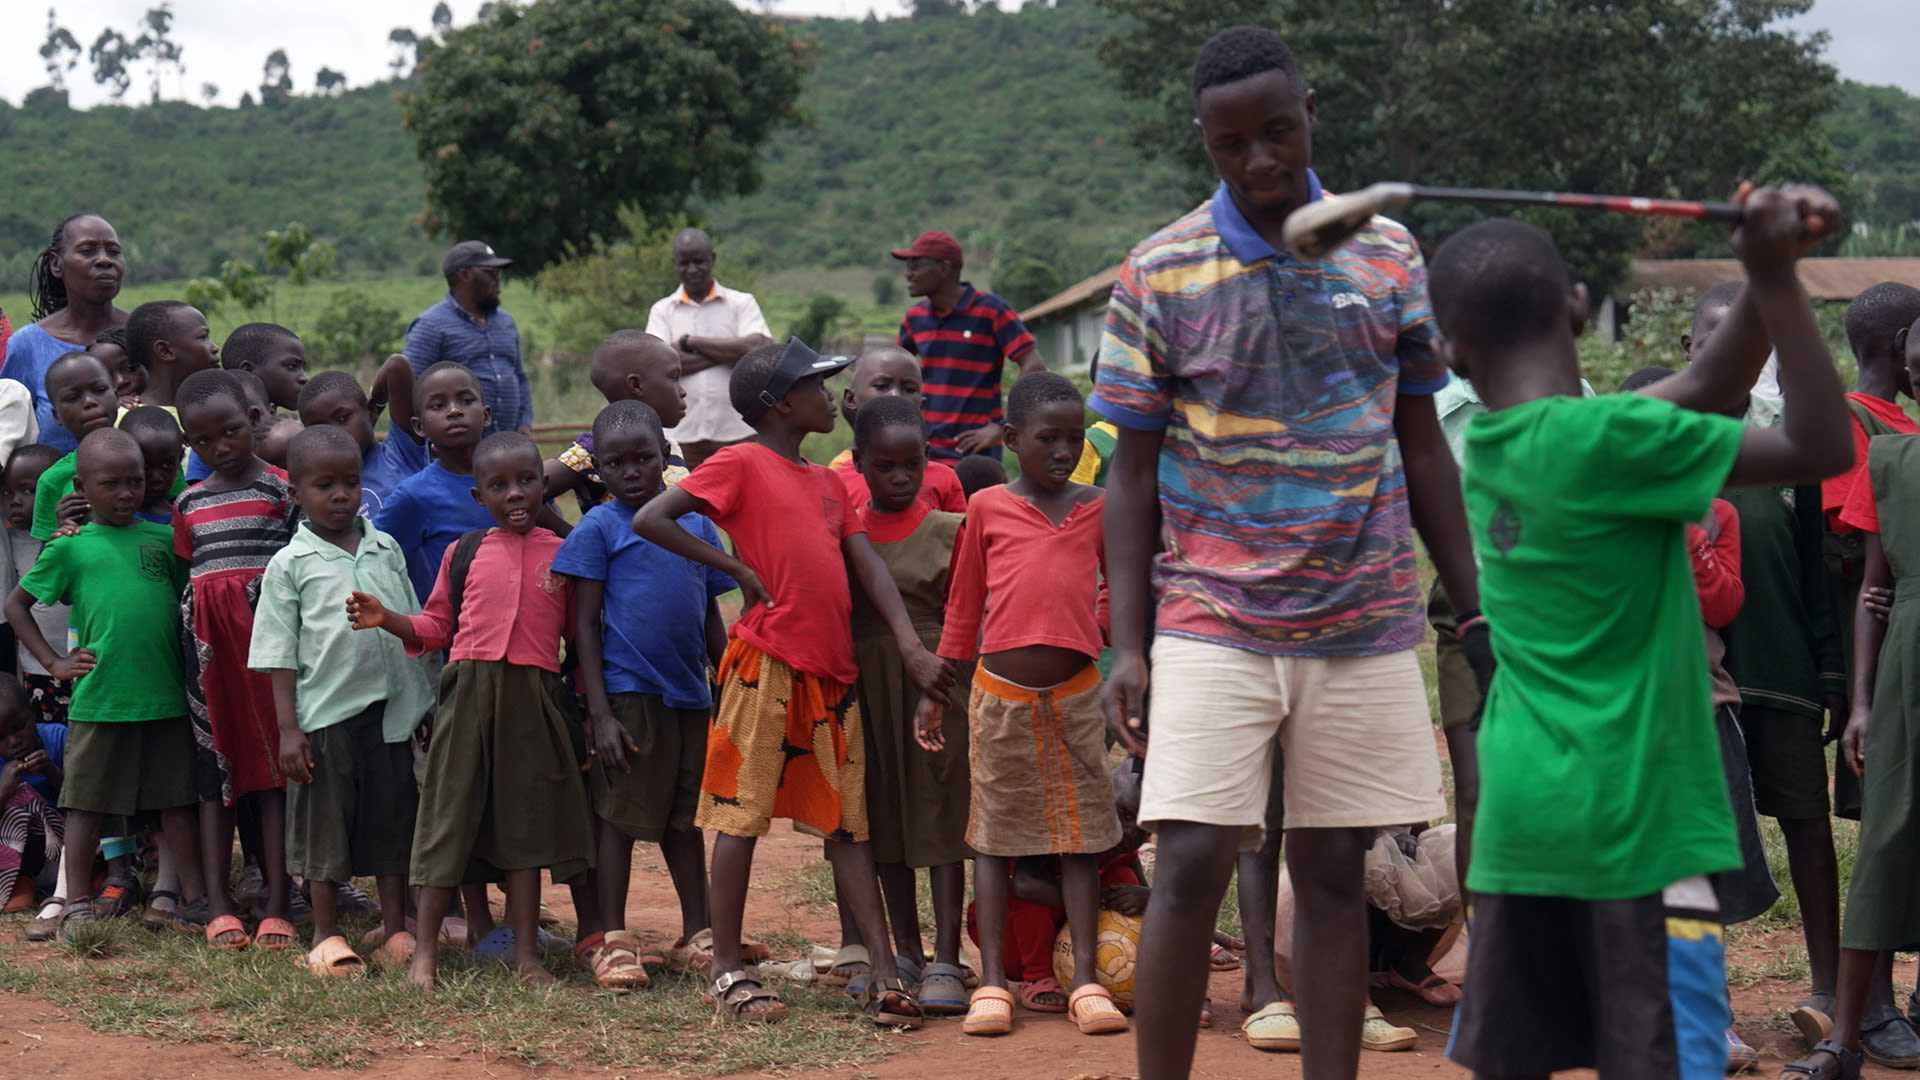 Roger Sali is spreading his love for golf in Uganda, one kid at a time. (Photo courtesy of the PGA TOUR)